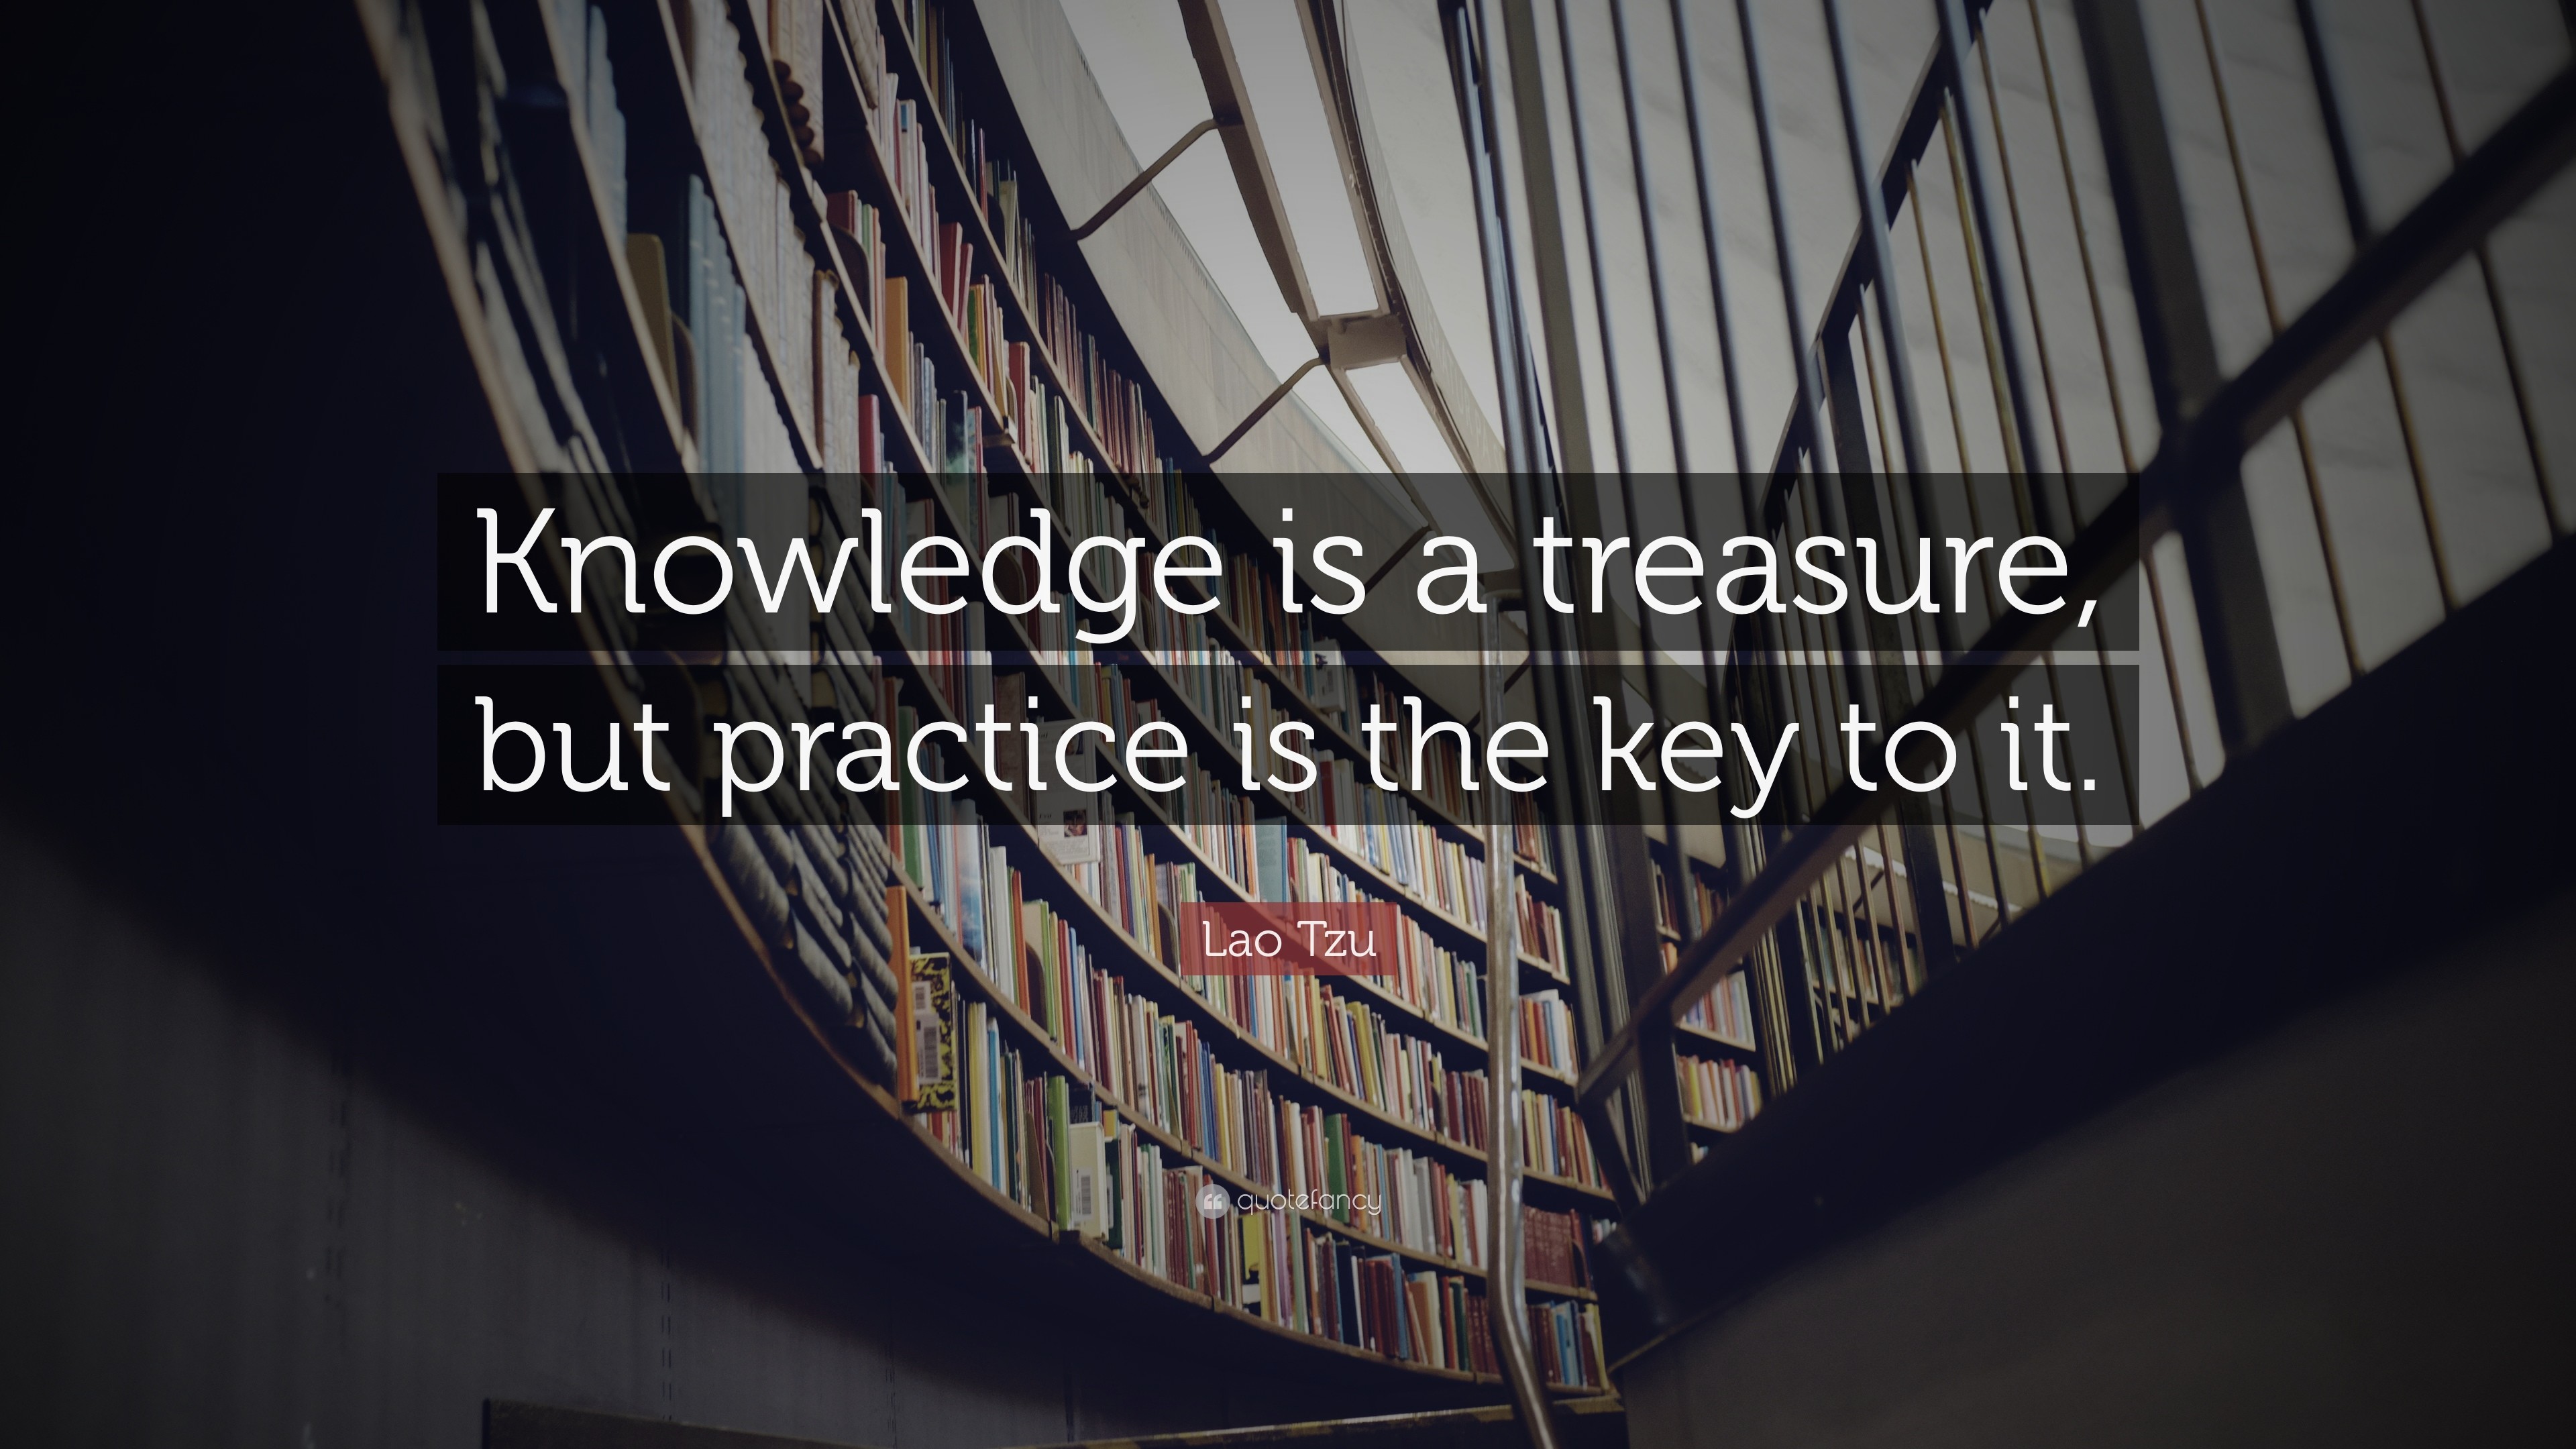 3840x2160 Lao Tzu Quote: “Knowledge is a treasure, but practice is the key to